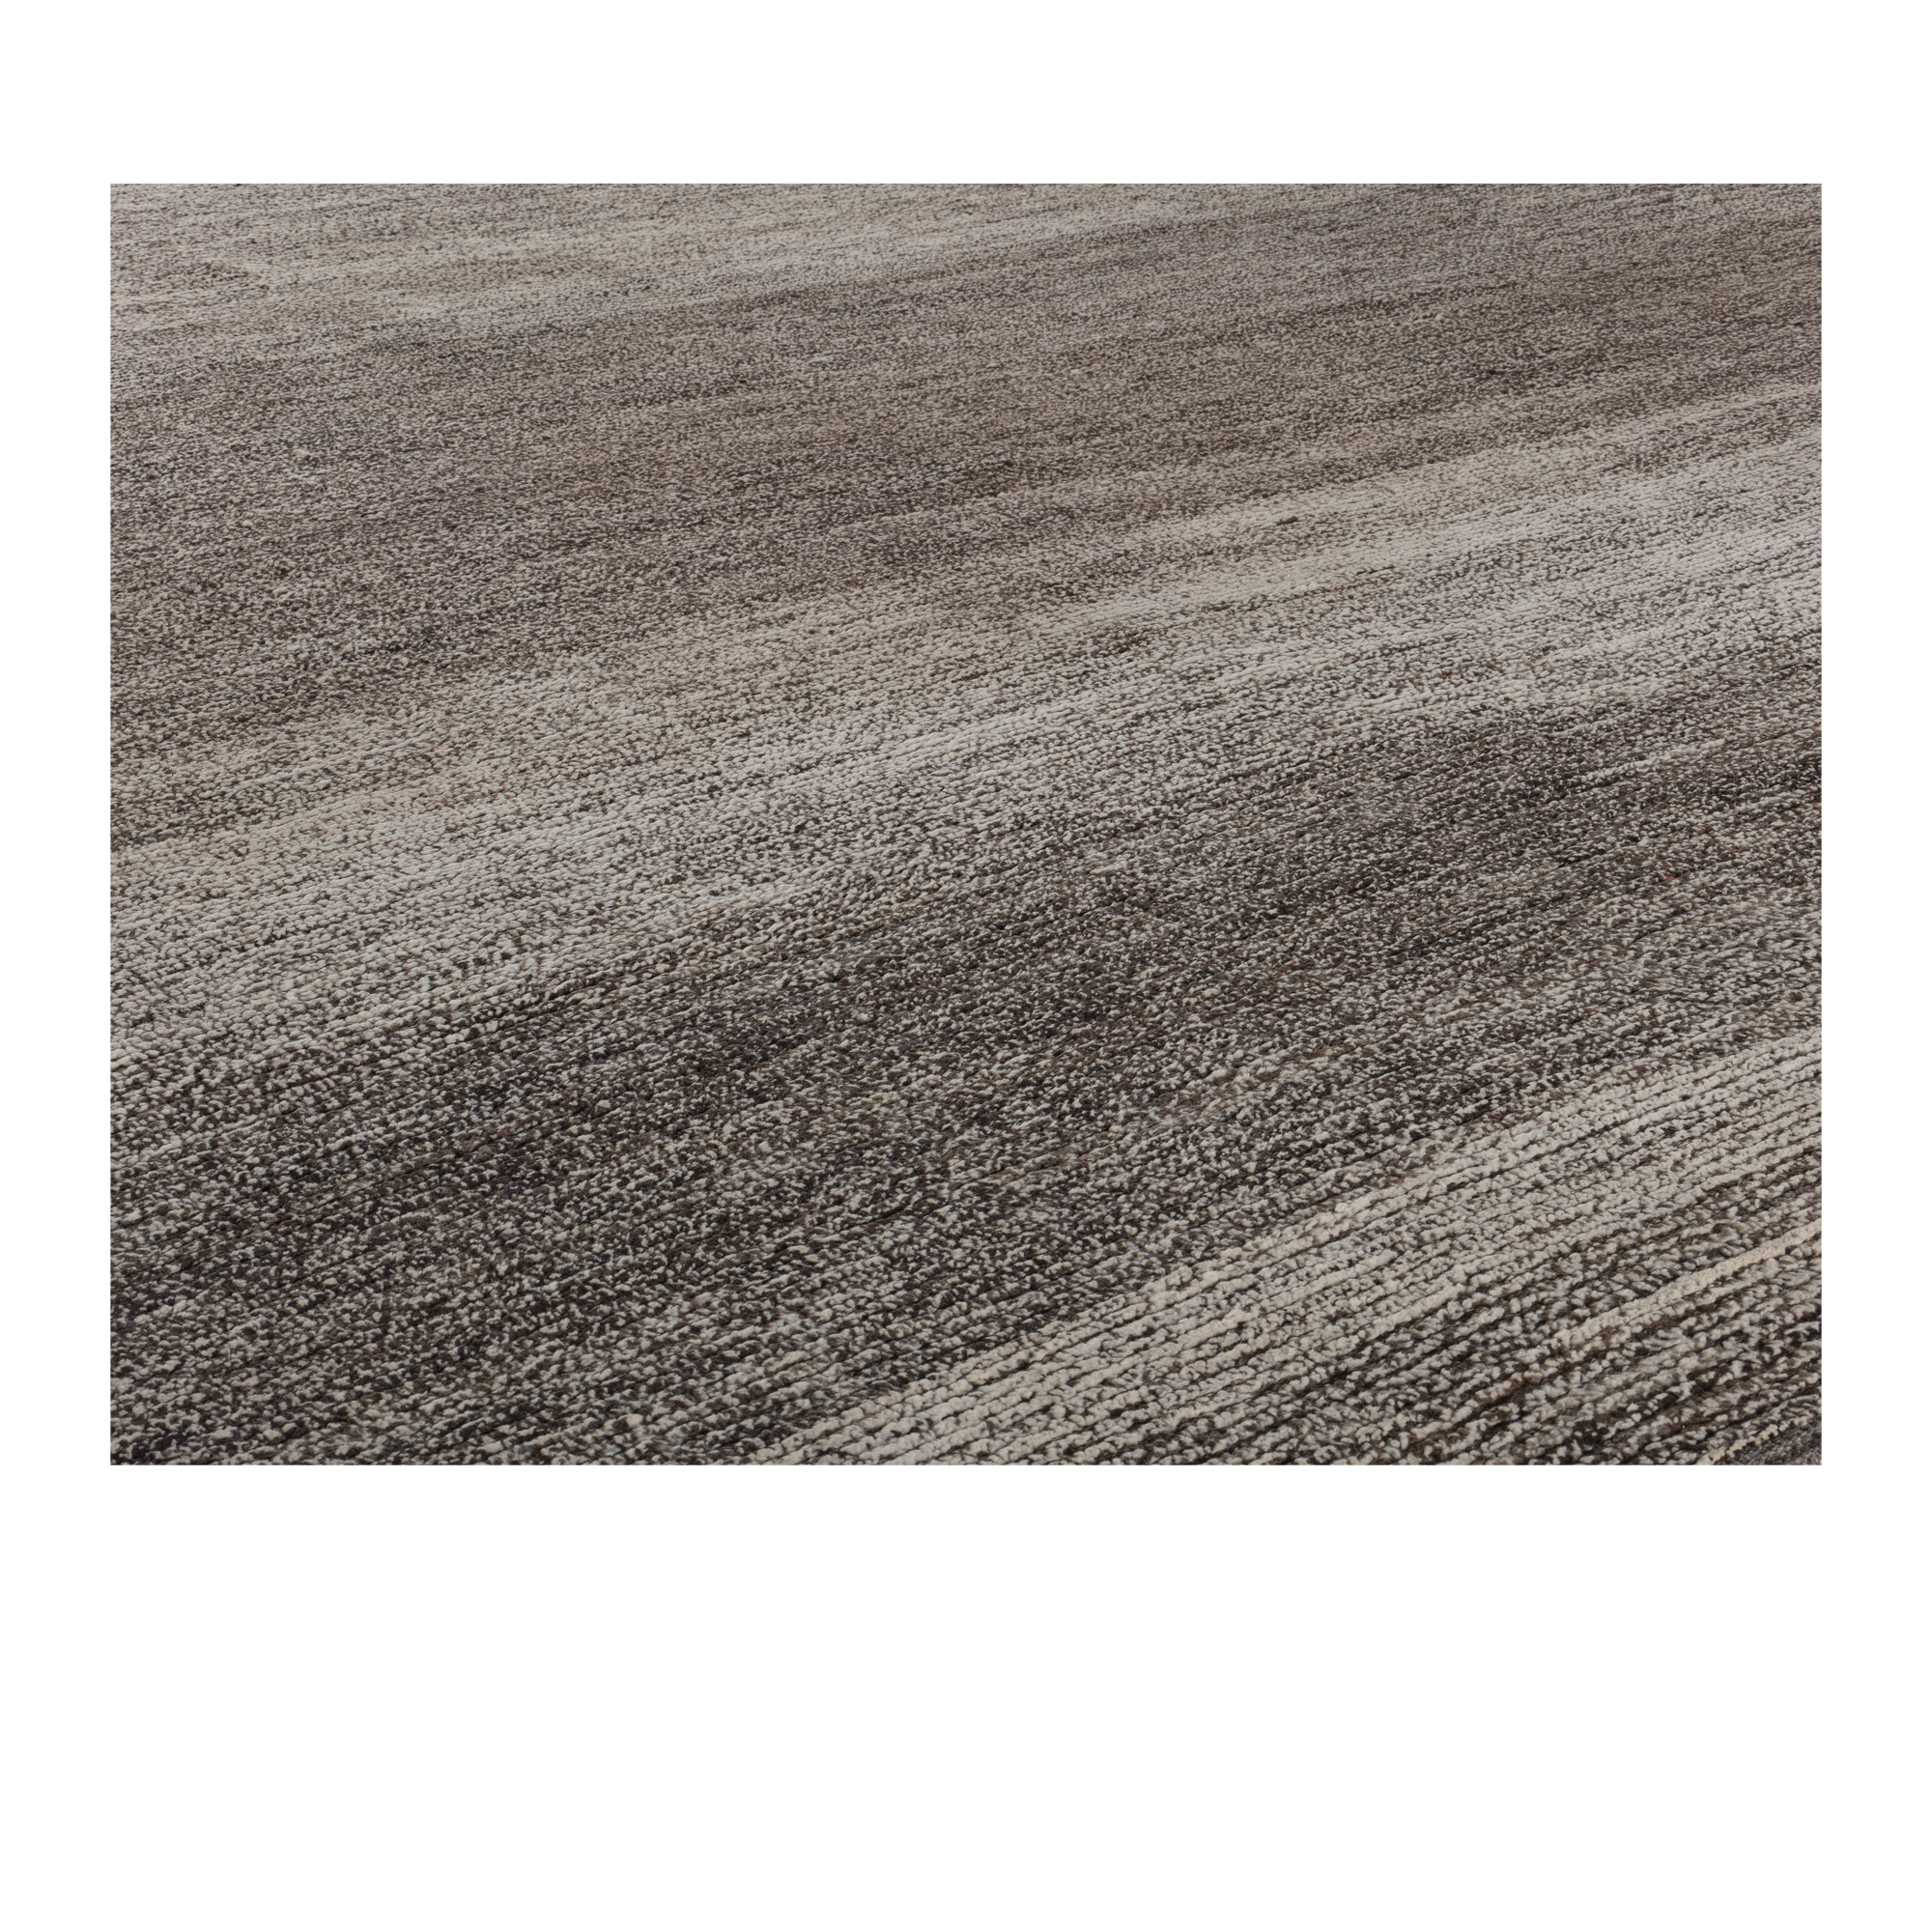 Our Patagonia rug is hand-knotted, and made from the finest hand-carded, hand-spun naturally dyed wool with silk accent.